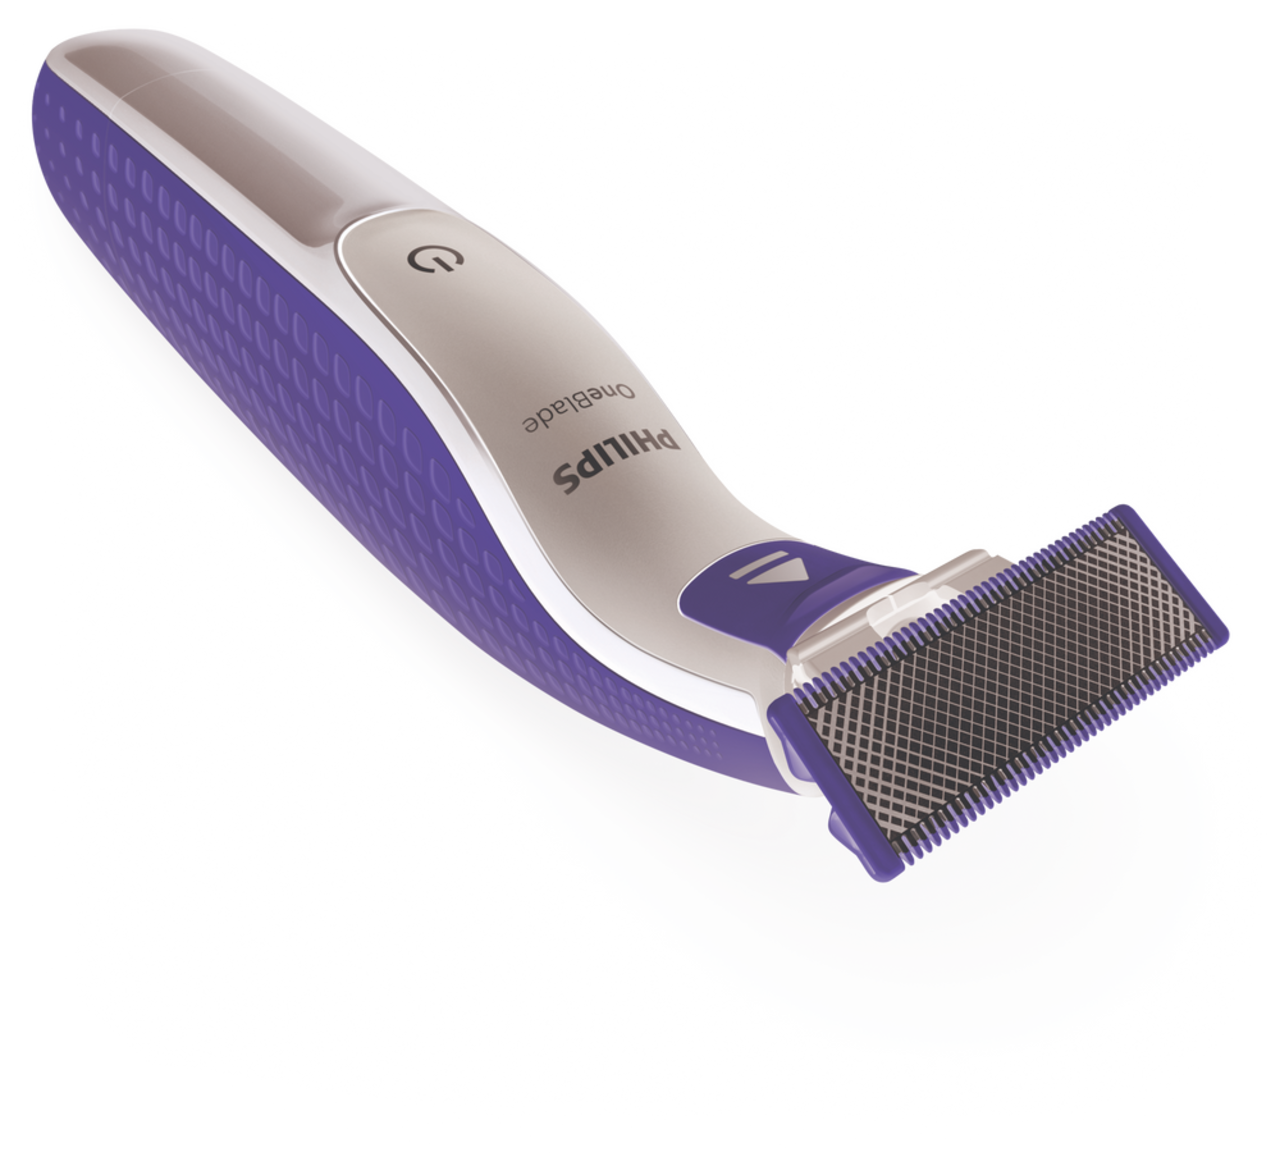 Philips One Blade QP2520/21 Hybrid Electric Trimmer & Shaver For